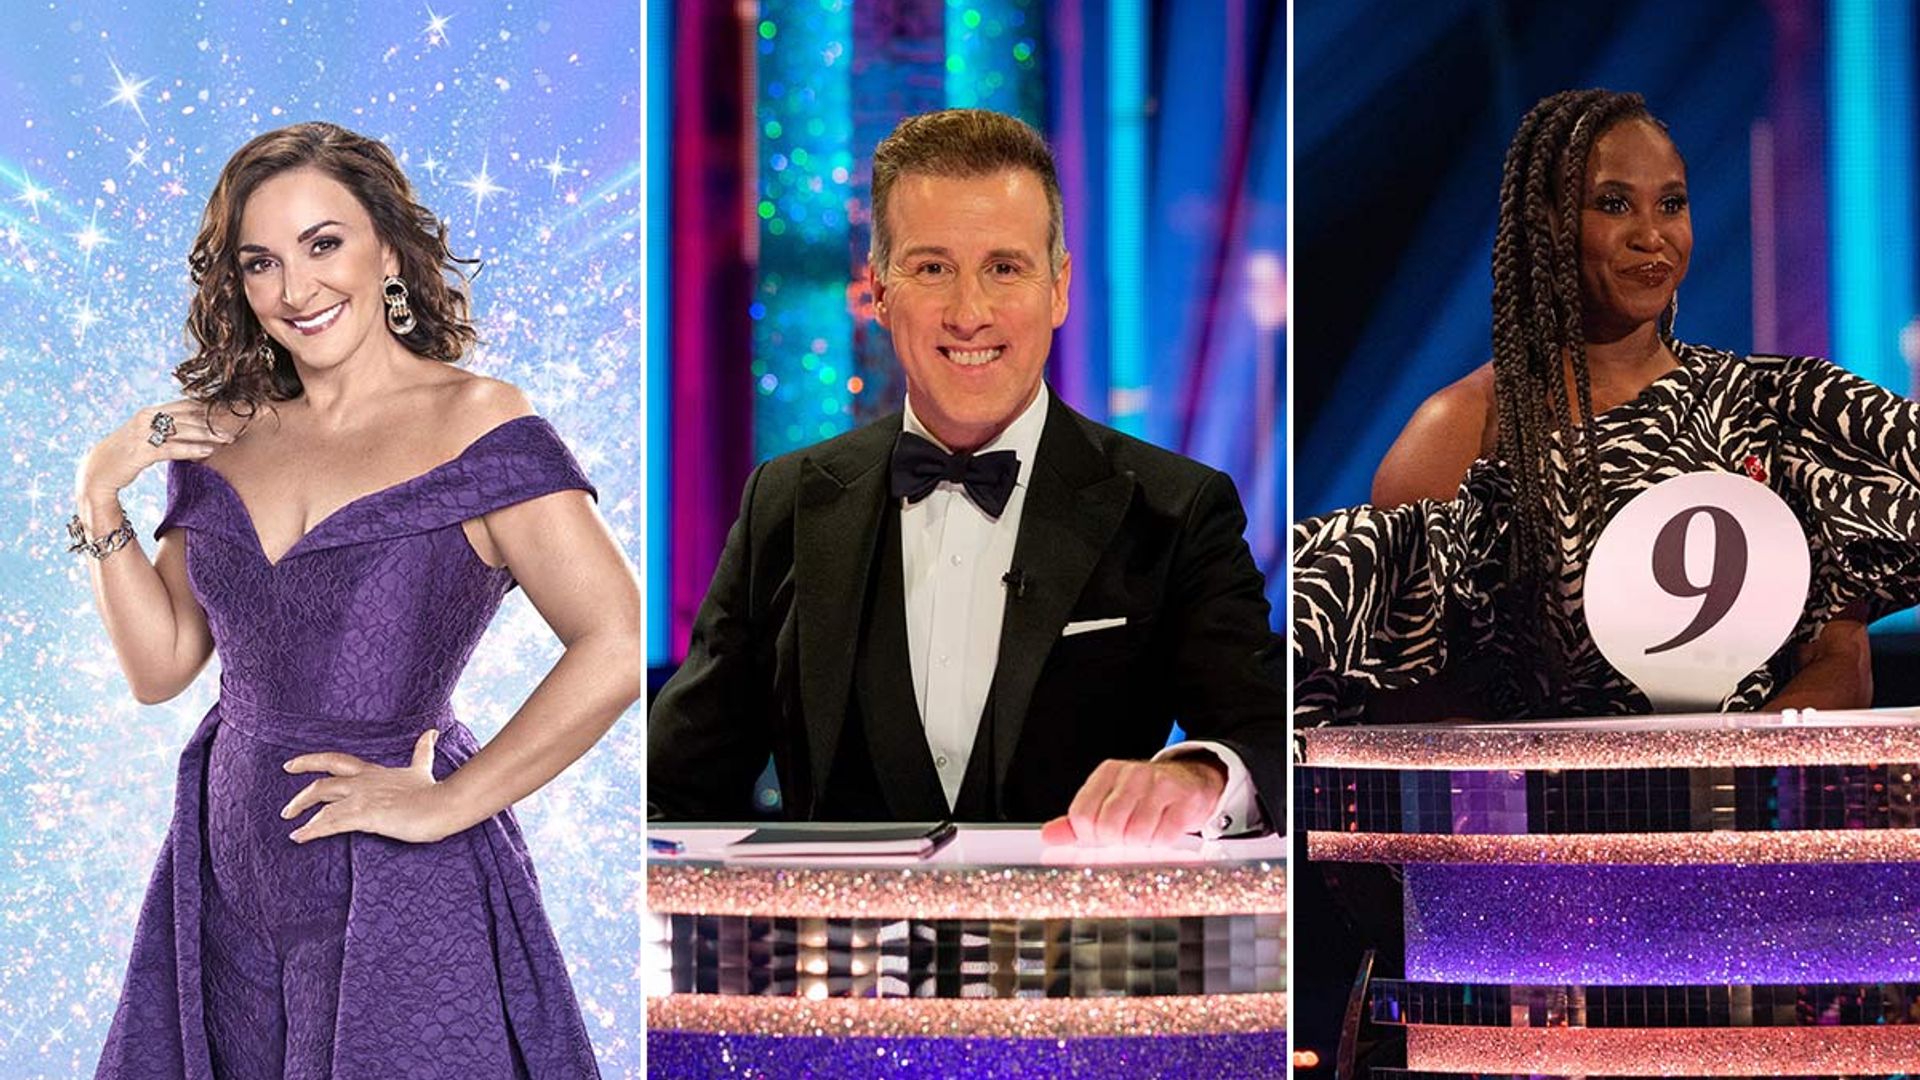 Anton du Beke tells Shirley Ballas what he really thinks about giving up his judging seat